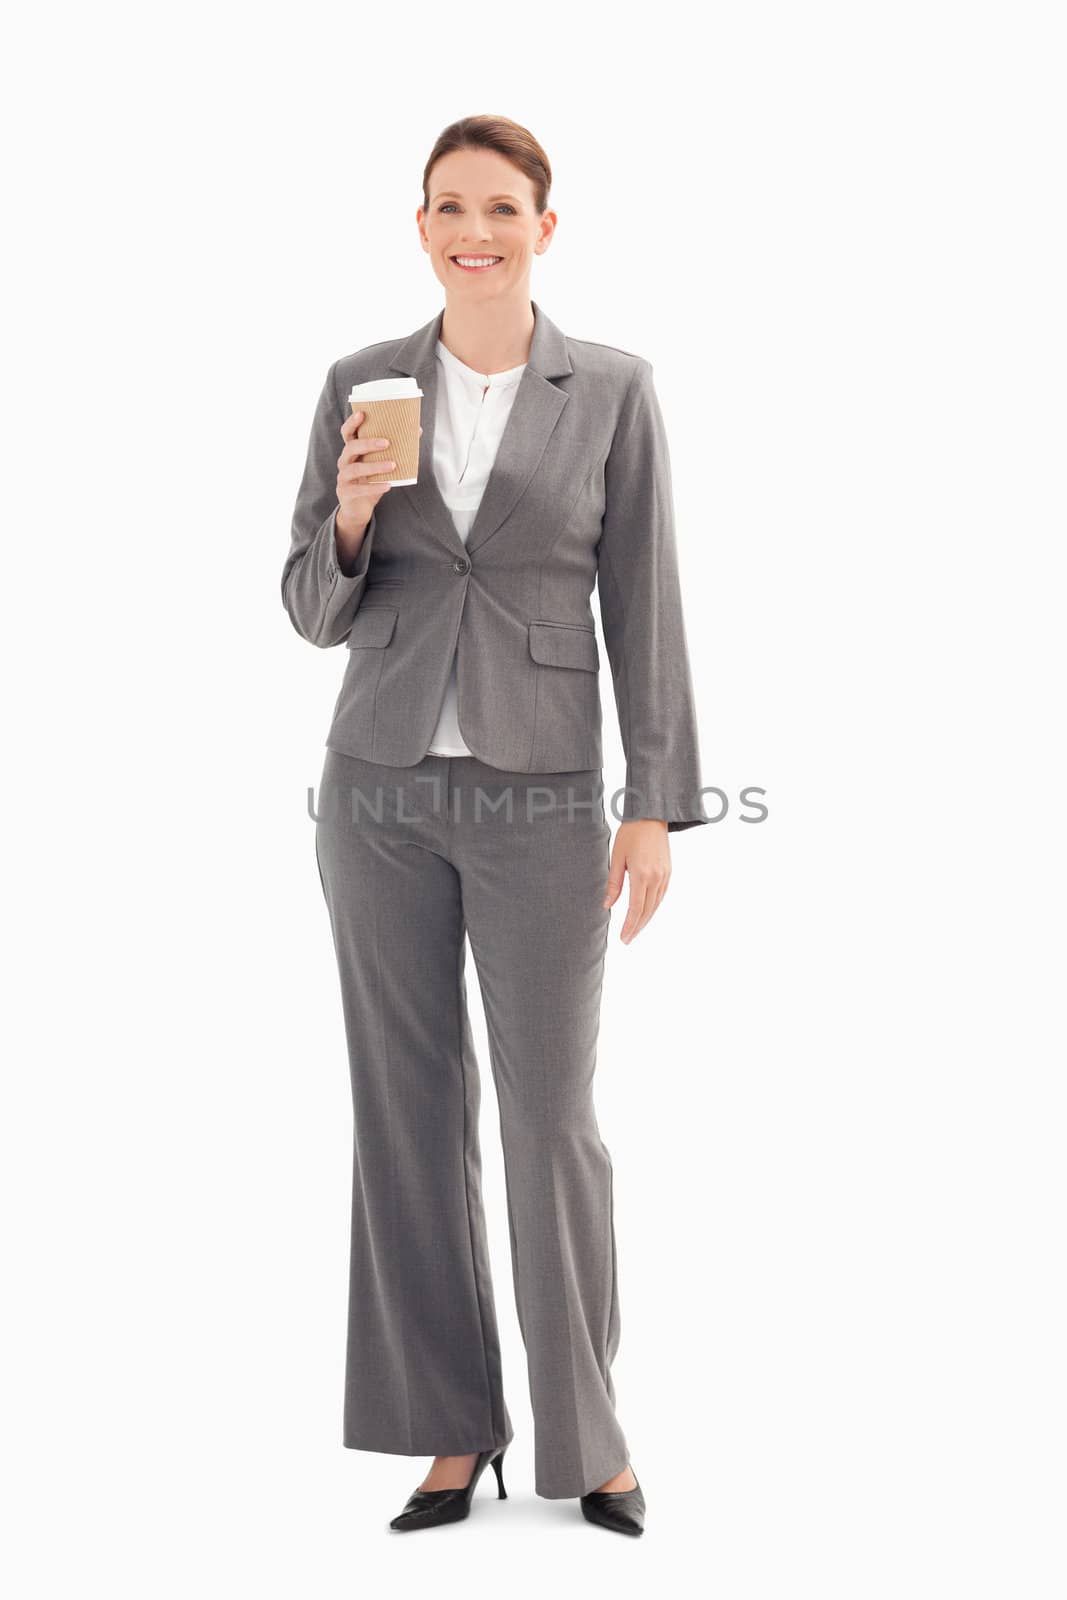 Smiling businesswoman holding cup of coffee  by Wavebreakmedia